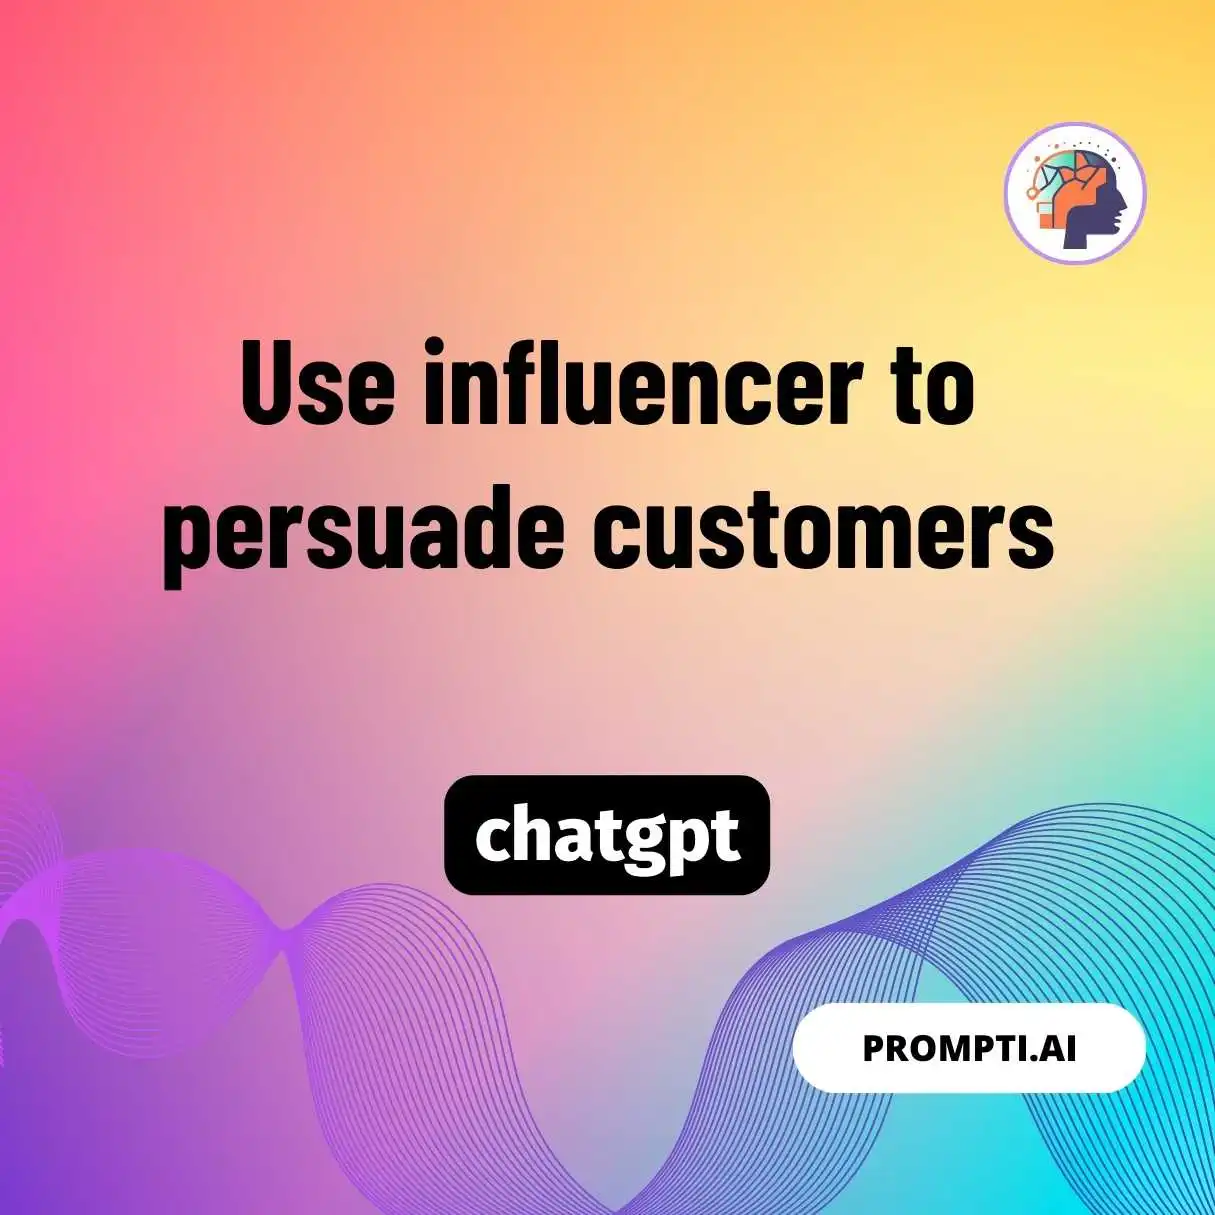 Use influencer to persuade customers